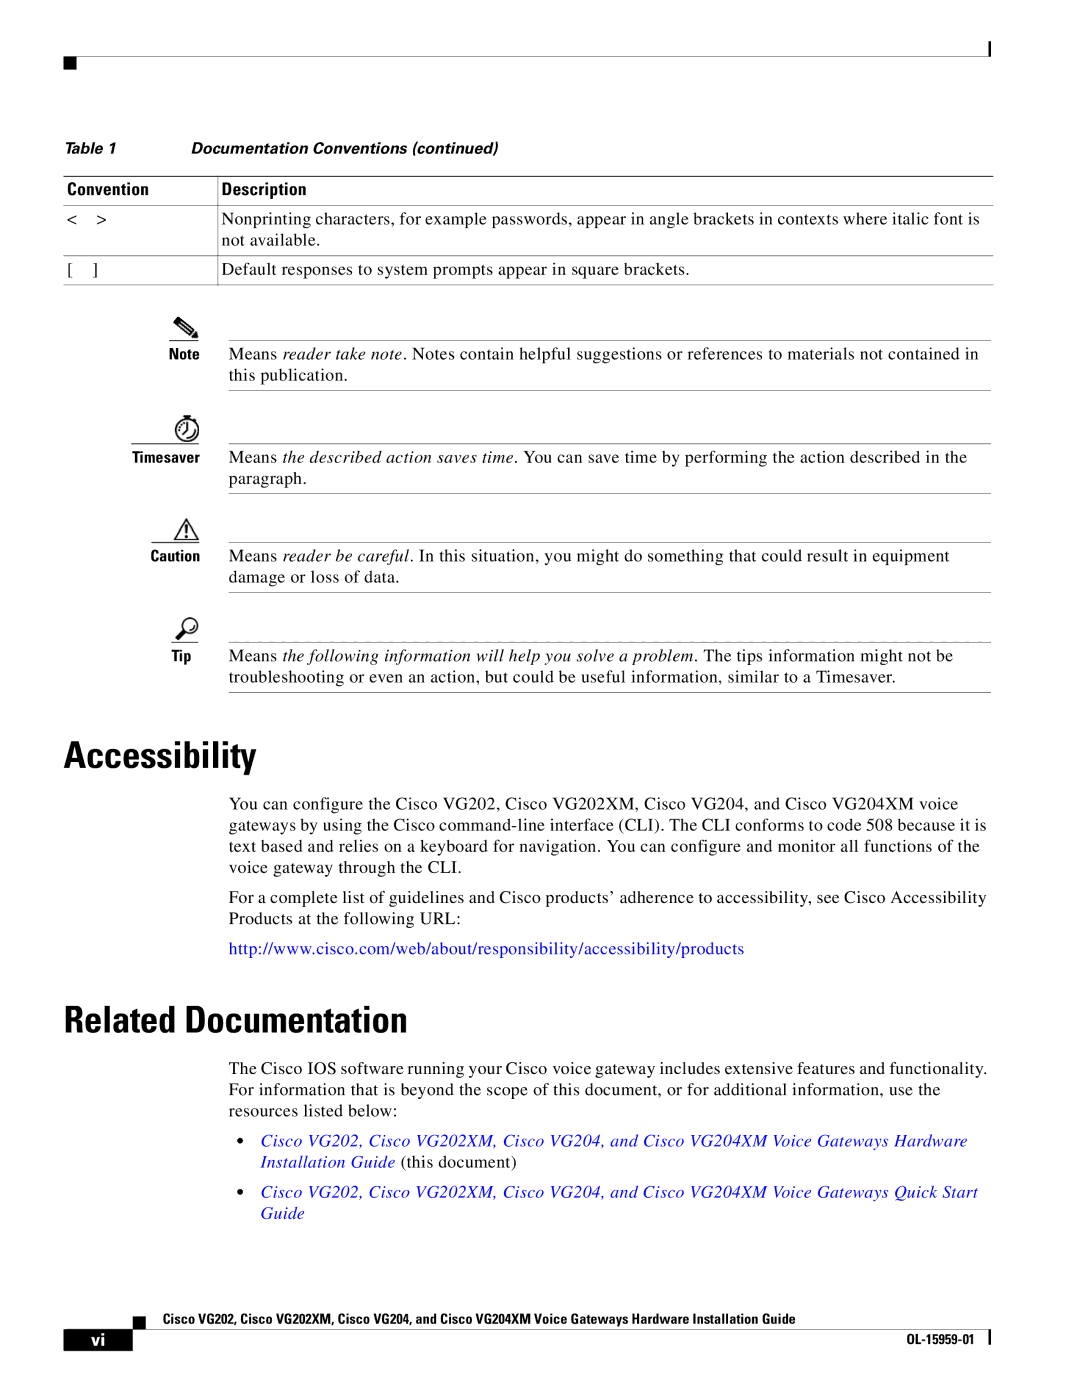 Cisco Systems VG202XM, VG204XM manual Accessibility, Related Documentation 